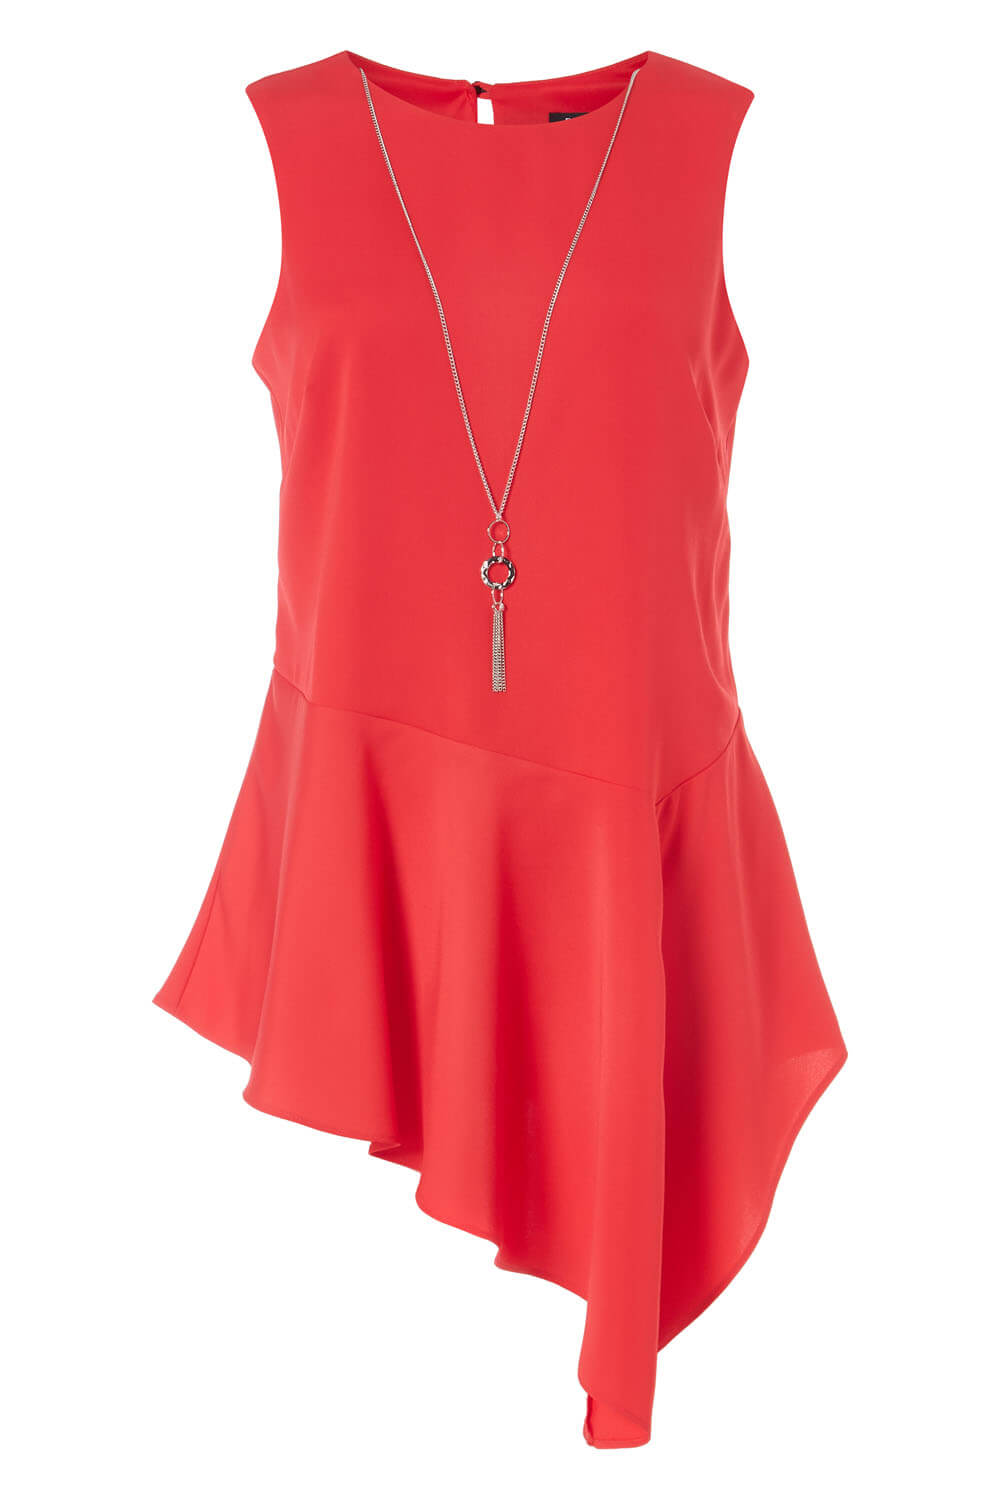 Red Asymmetric Necklace Peplum Top, Image 4 of 8